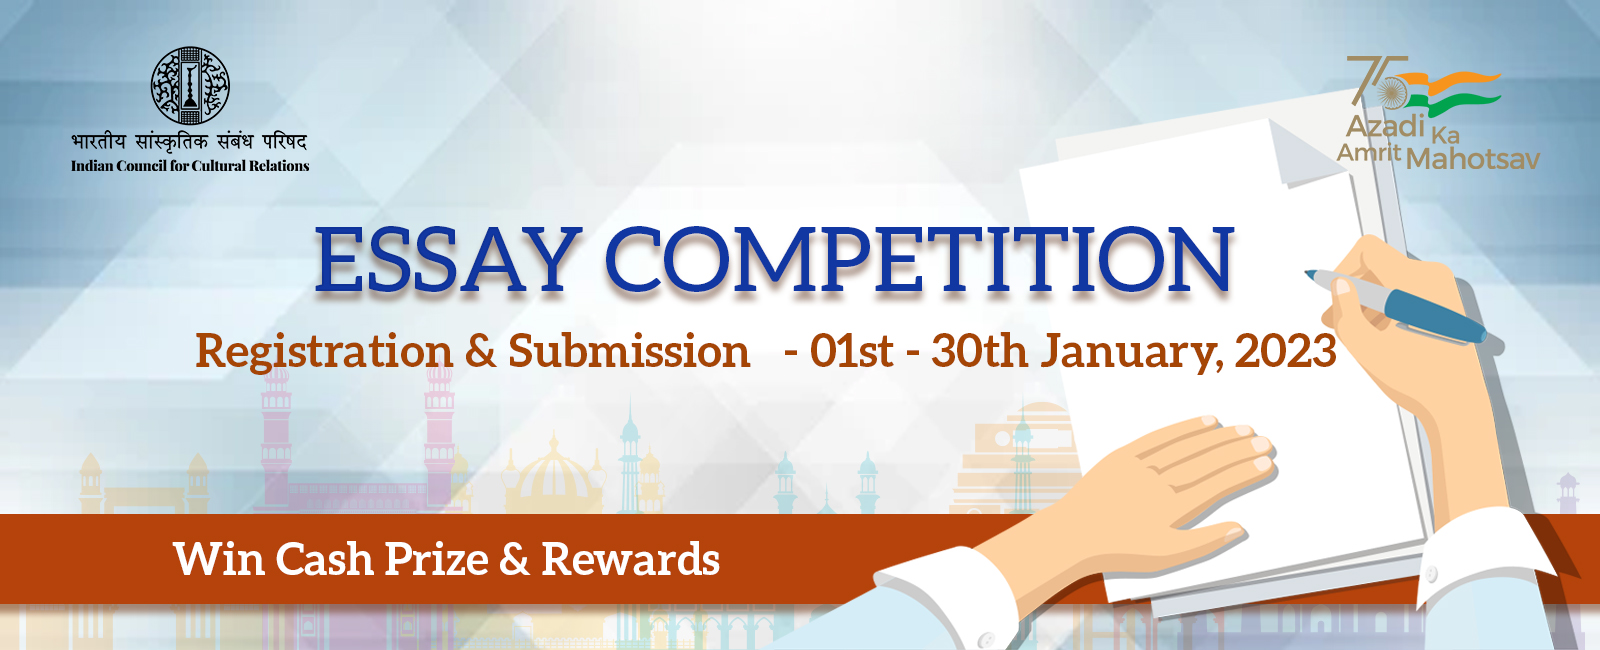 "Essay Competition for International students studying in India registration starts from 01.01.2023"